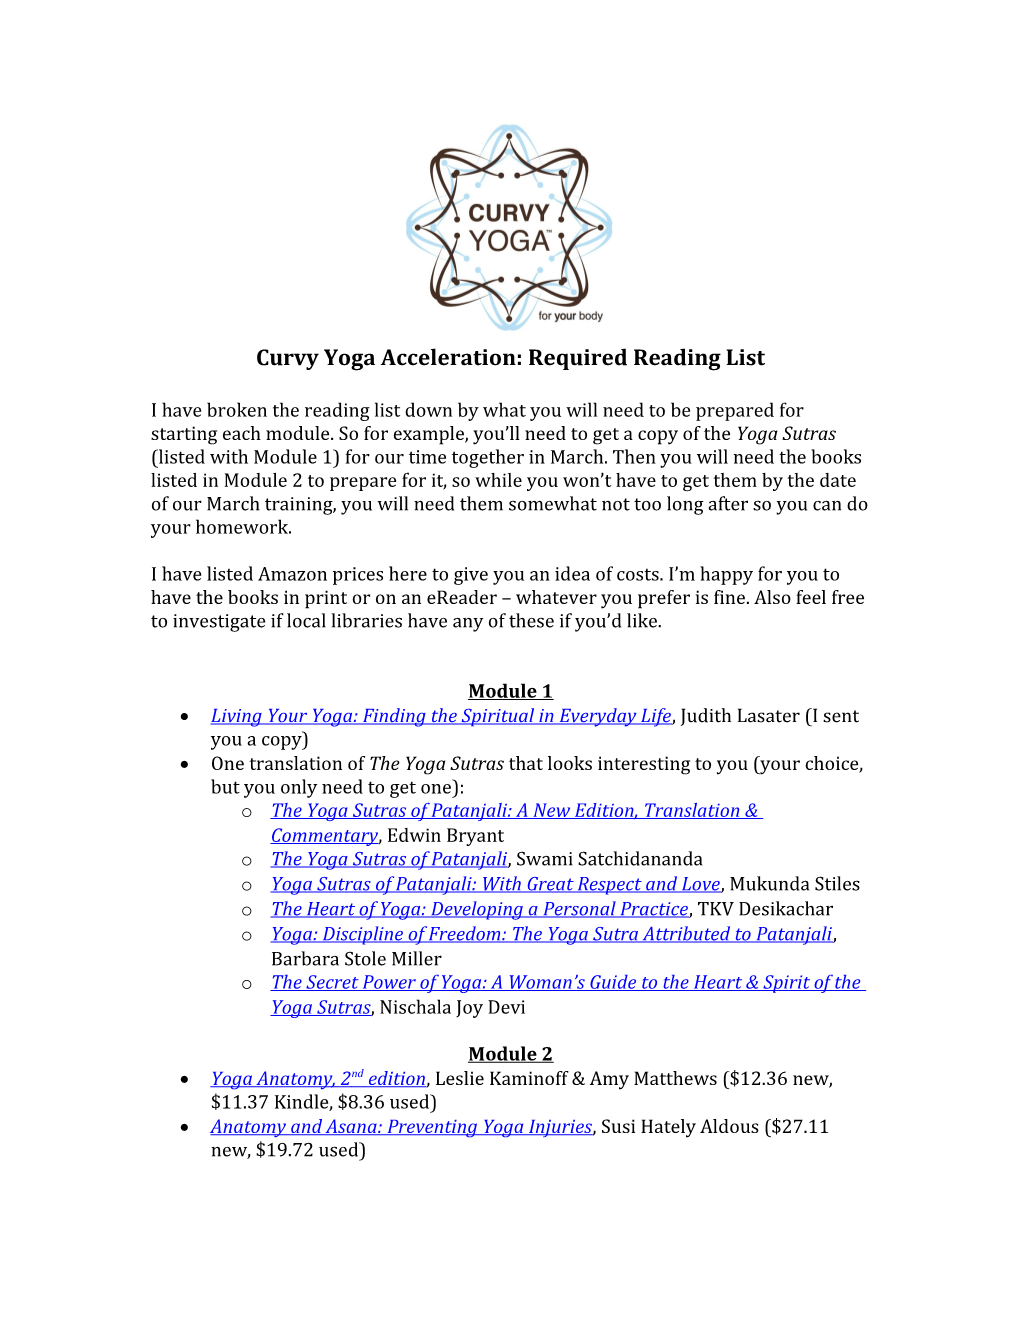 Curvy Yoga Acceleration: Required Reading List